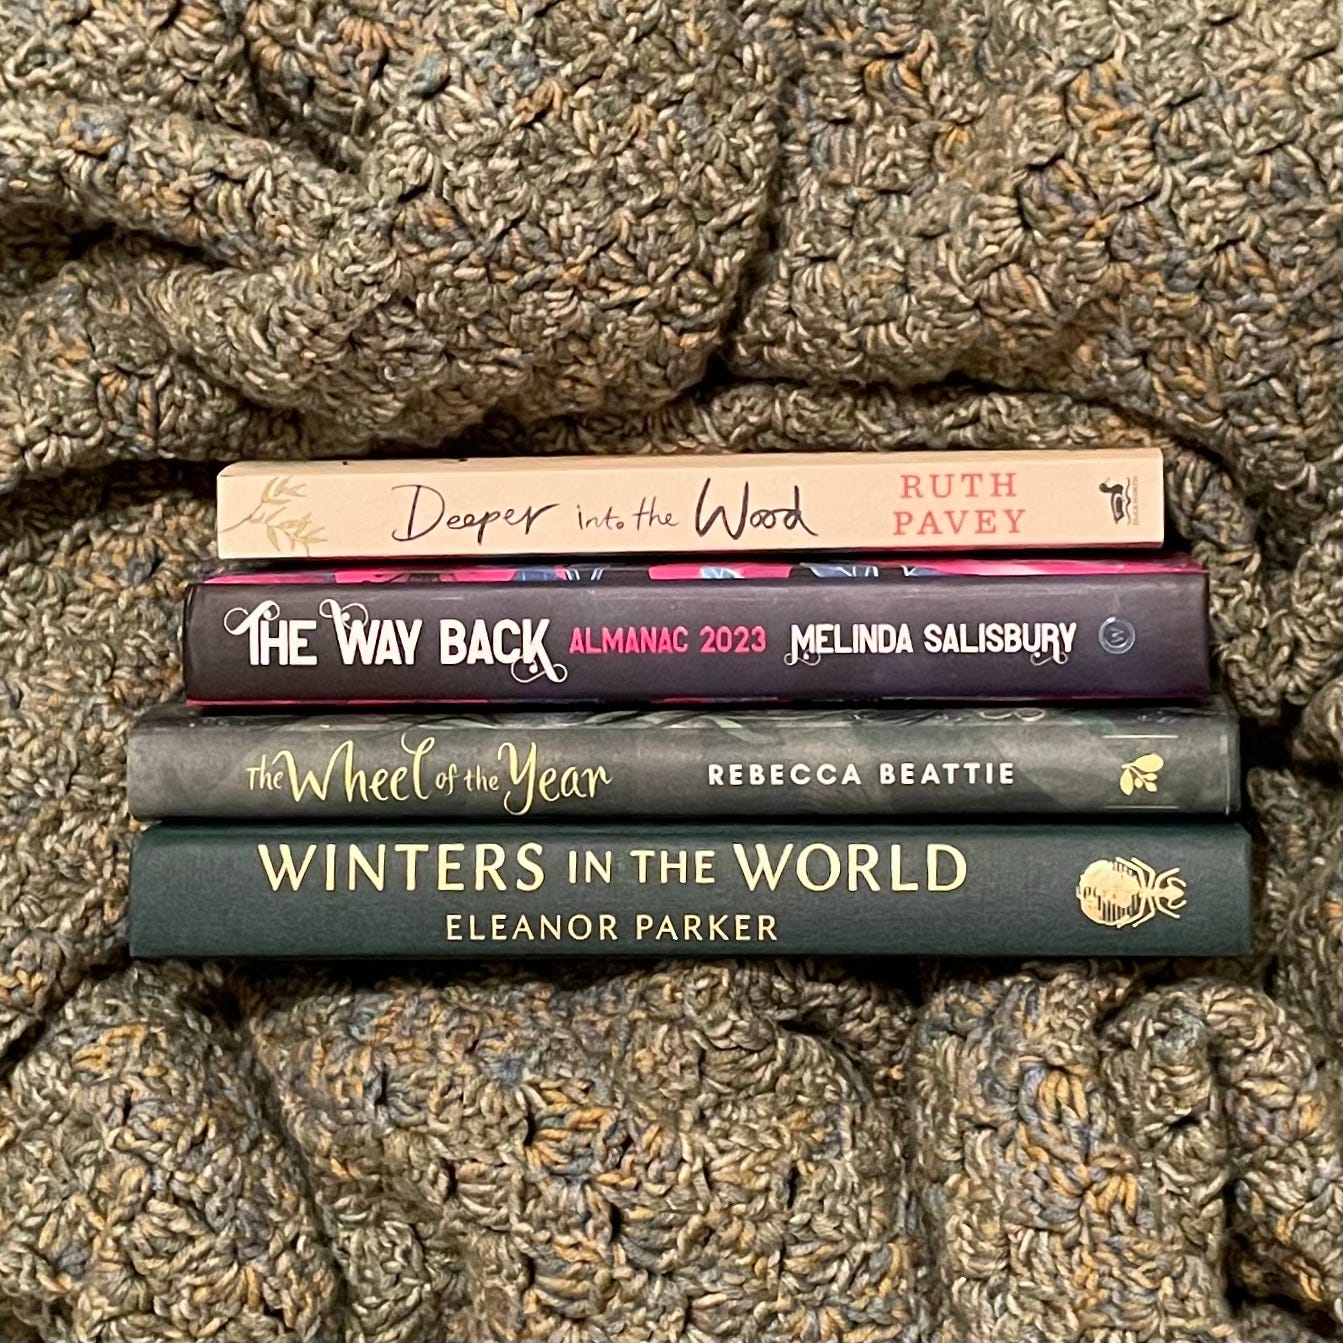 Photo of a stack of books surrounded by the folds of crocheted blanket